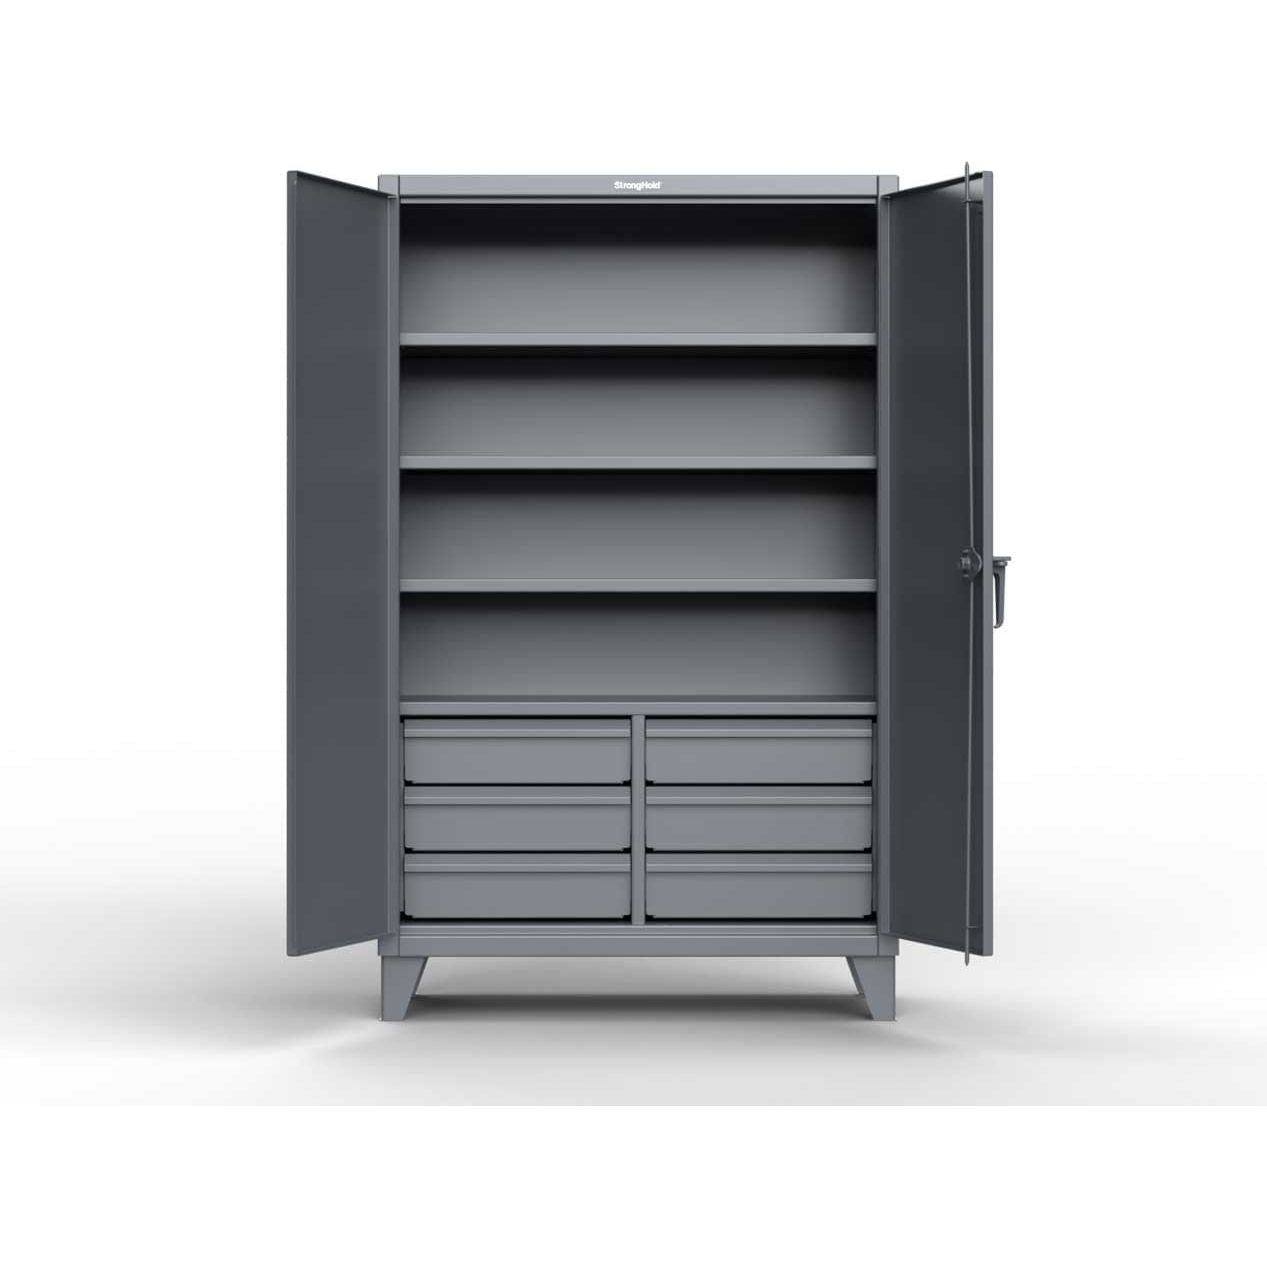 Dim Gray Strong Hold Extreme Duty 12 GA Cabinet with 6 Half-Width Drawers, 4 Shelves